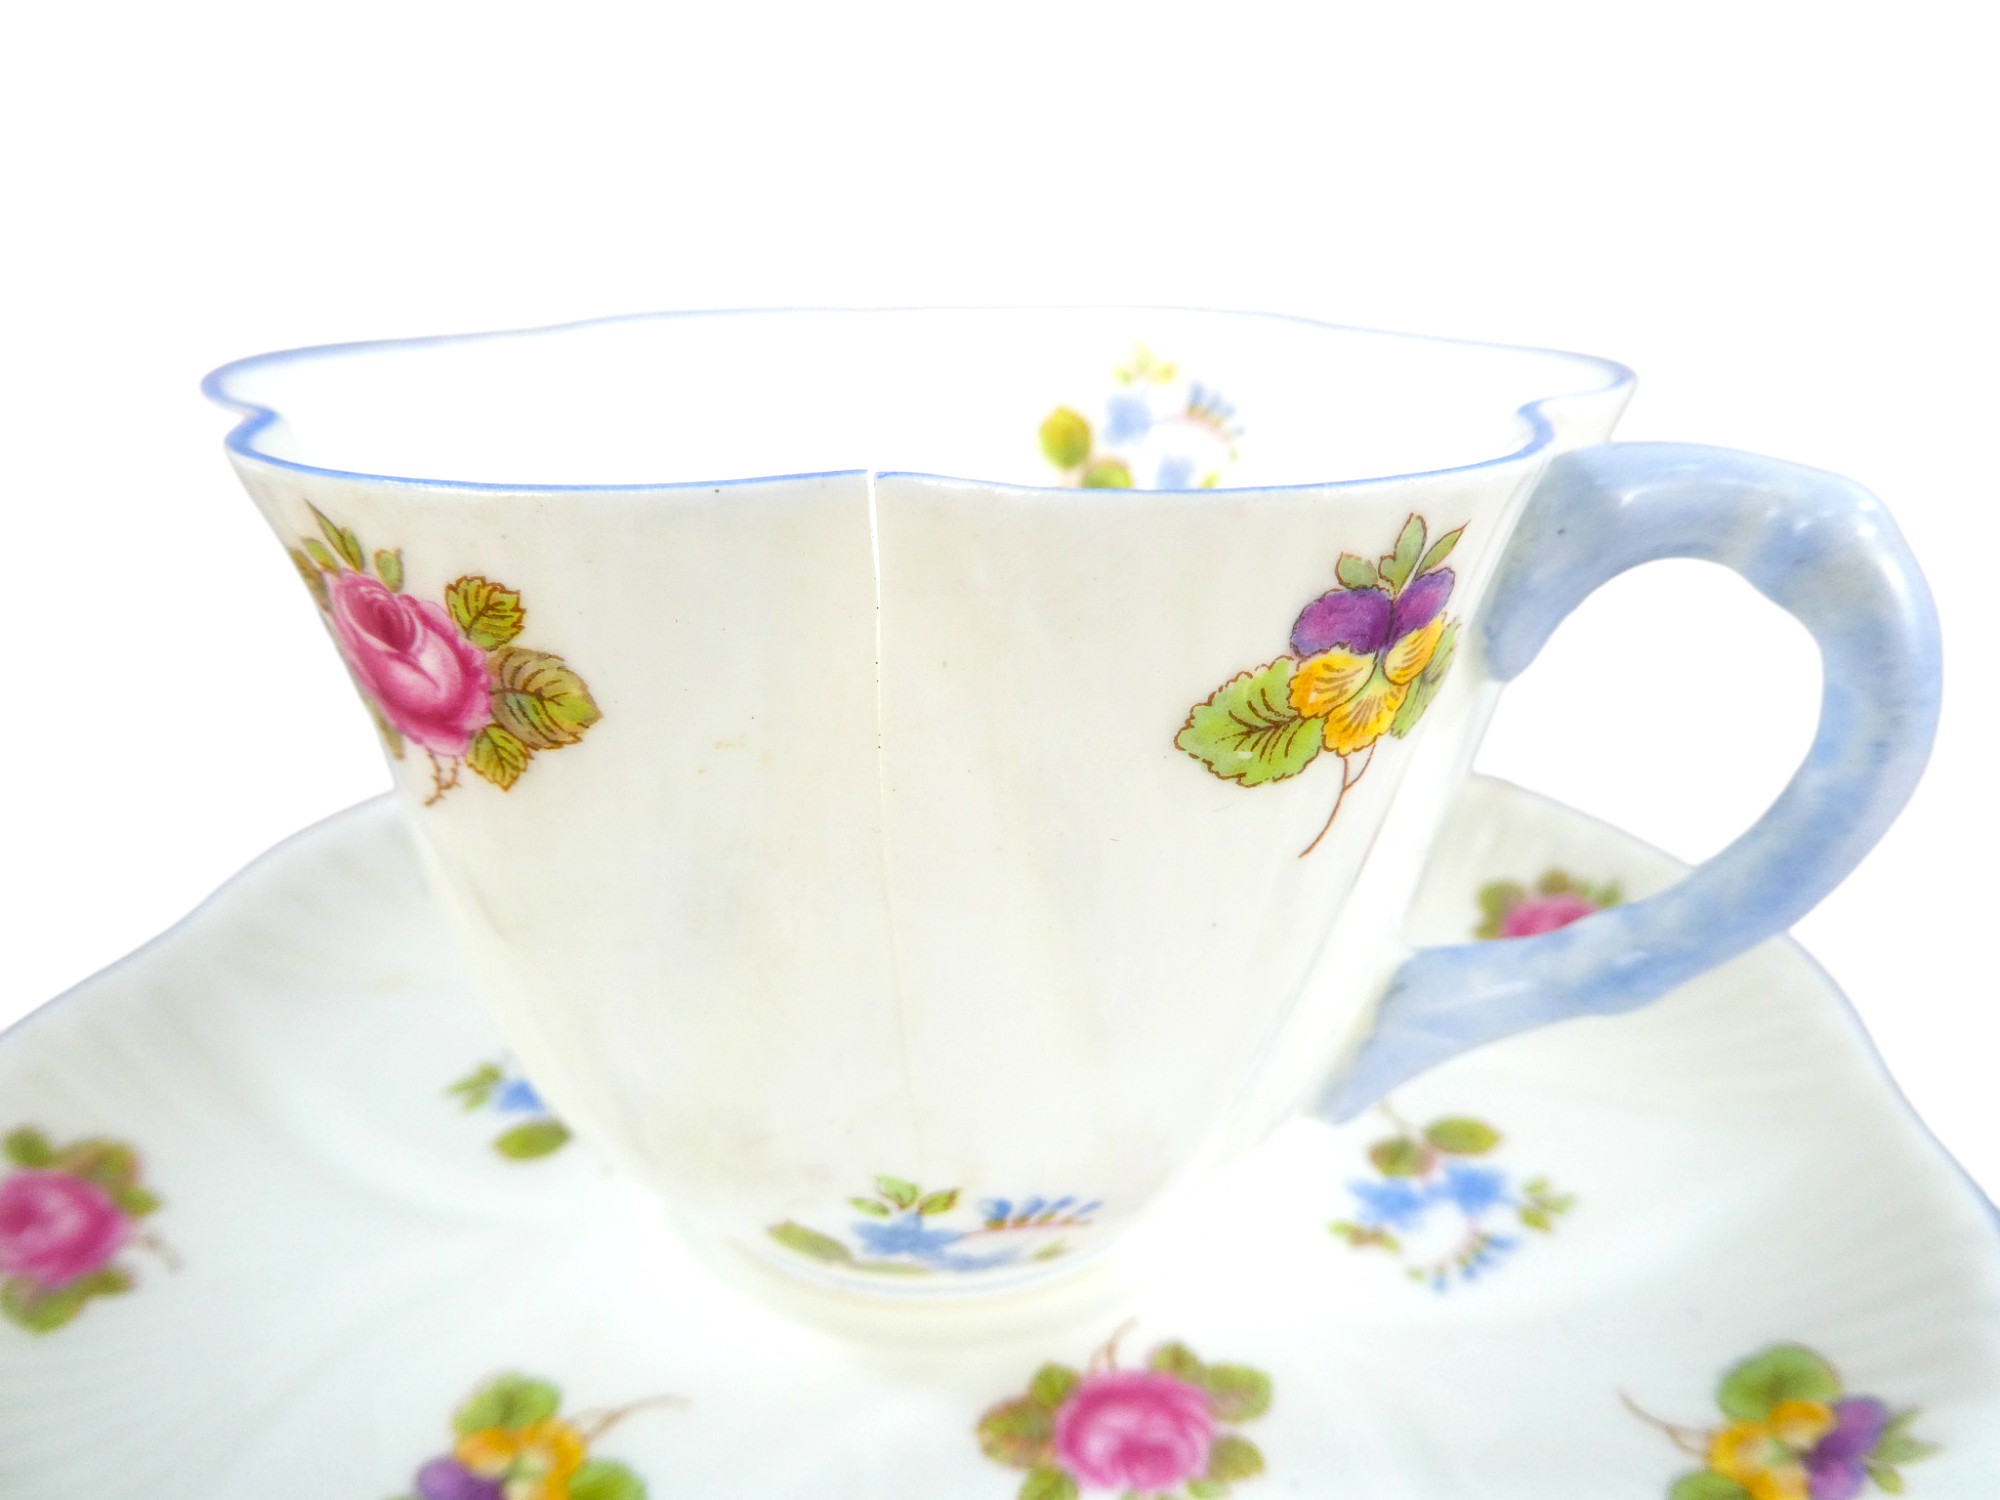 A mid 20th century Shelley tea service - decorated with floral sprigs and light blue details, a - Image 3 of 6